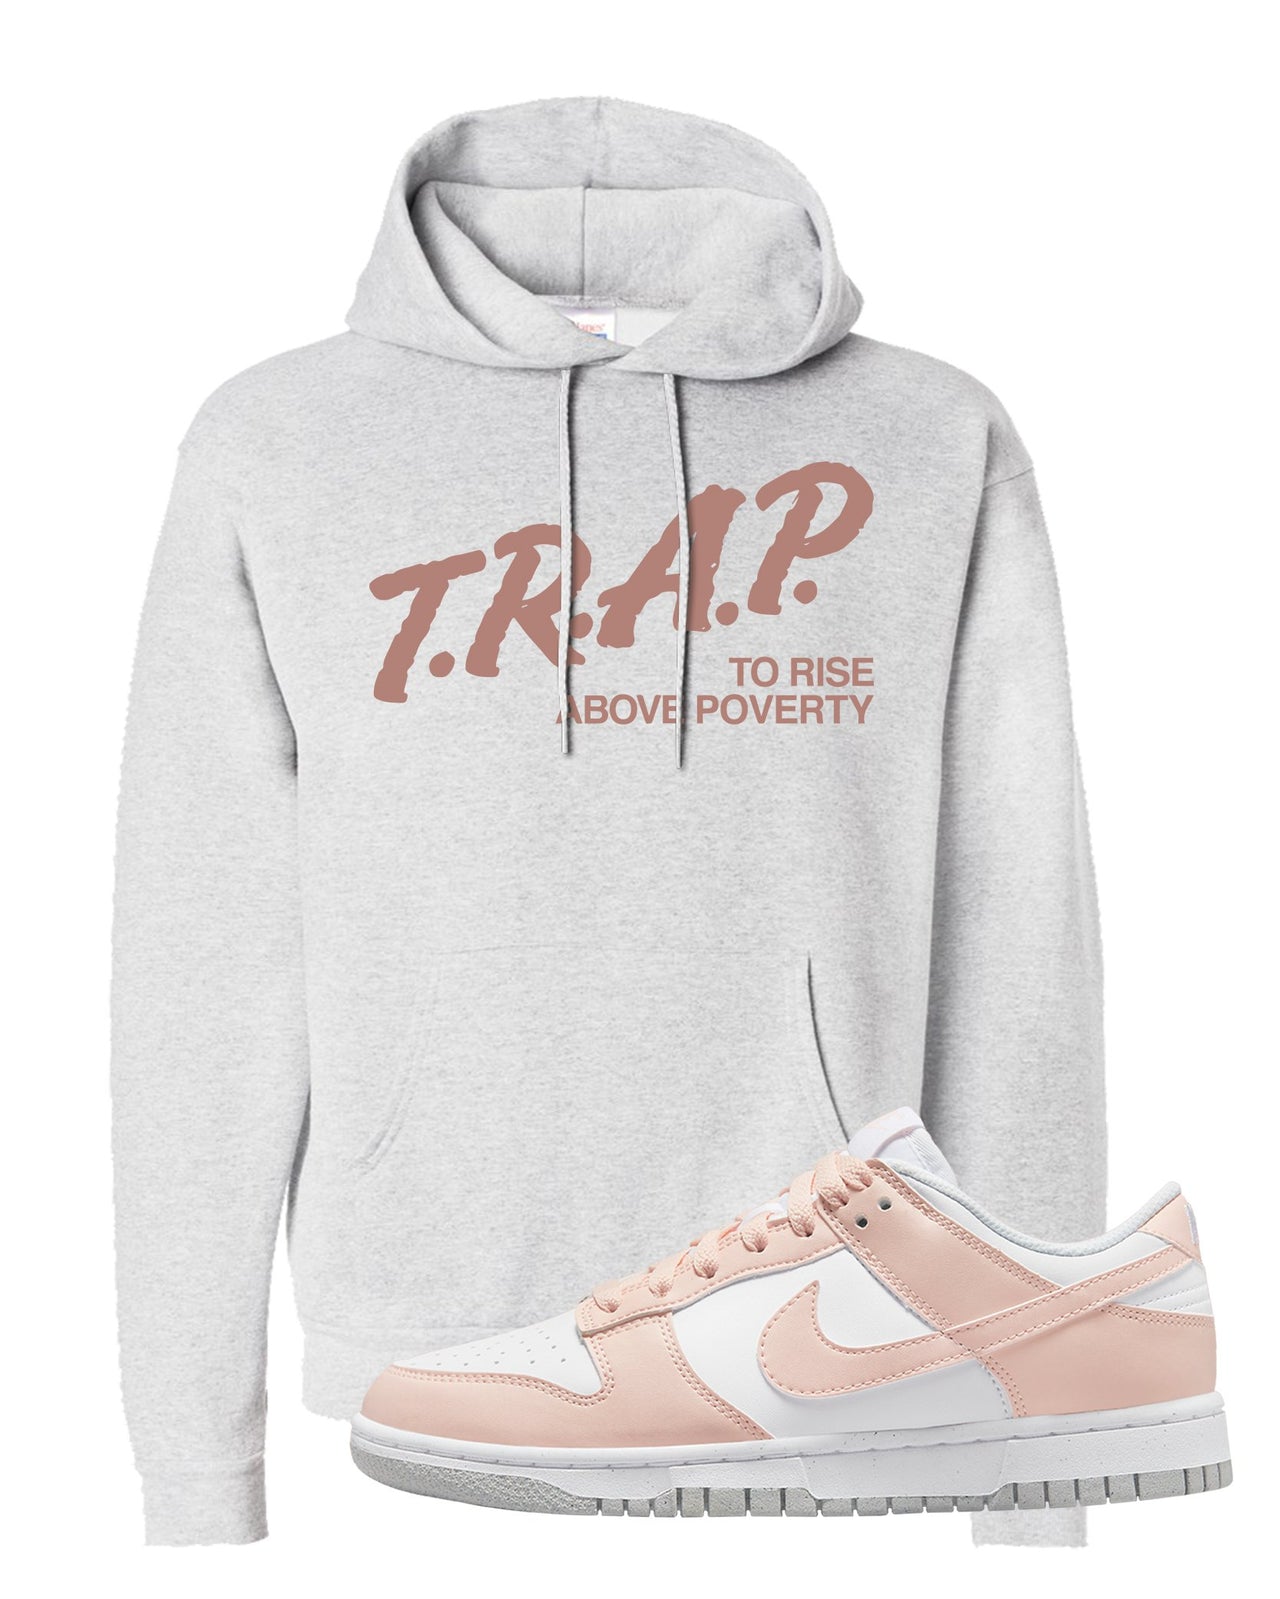 Next Nature Pale Citrus Low Dunks Hoodie | Trap To Rise Above Poverty, Ash